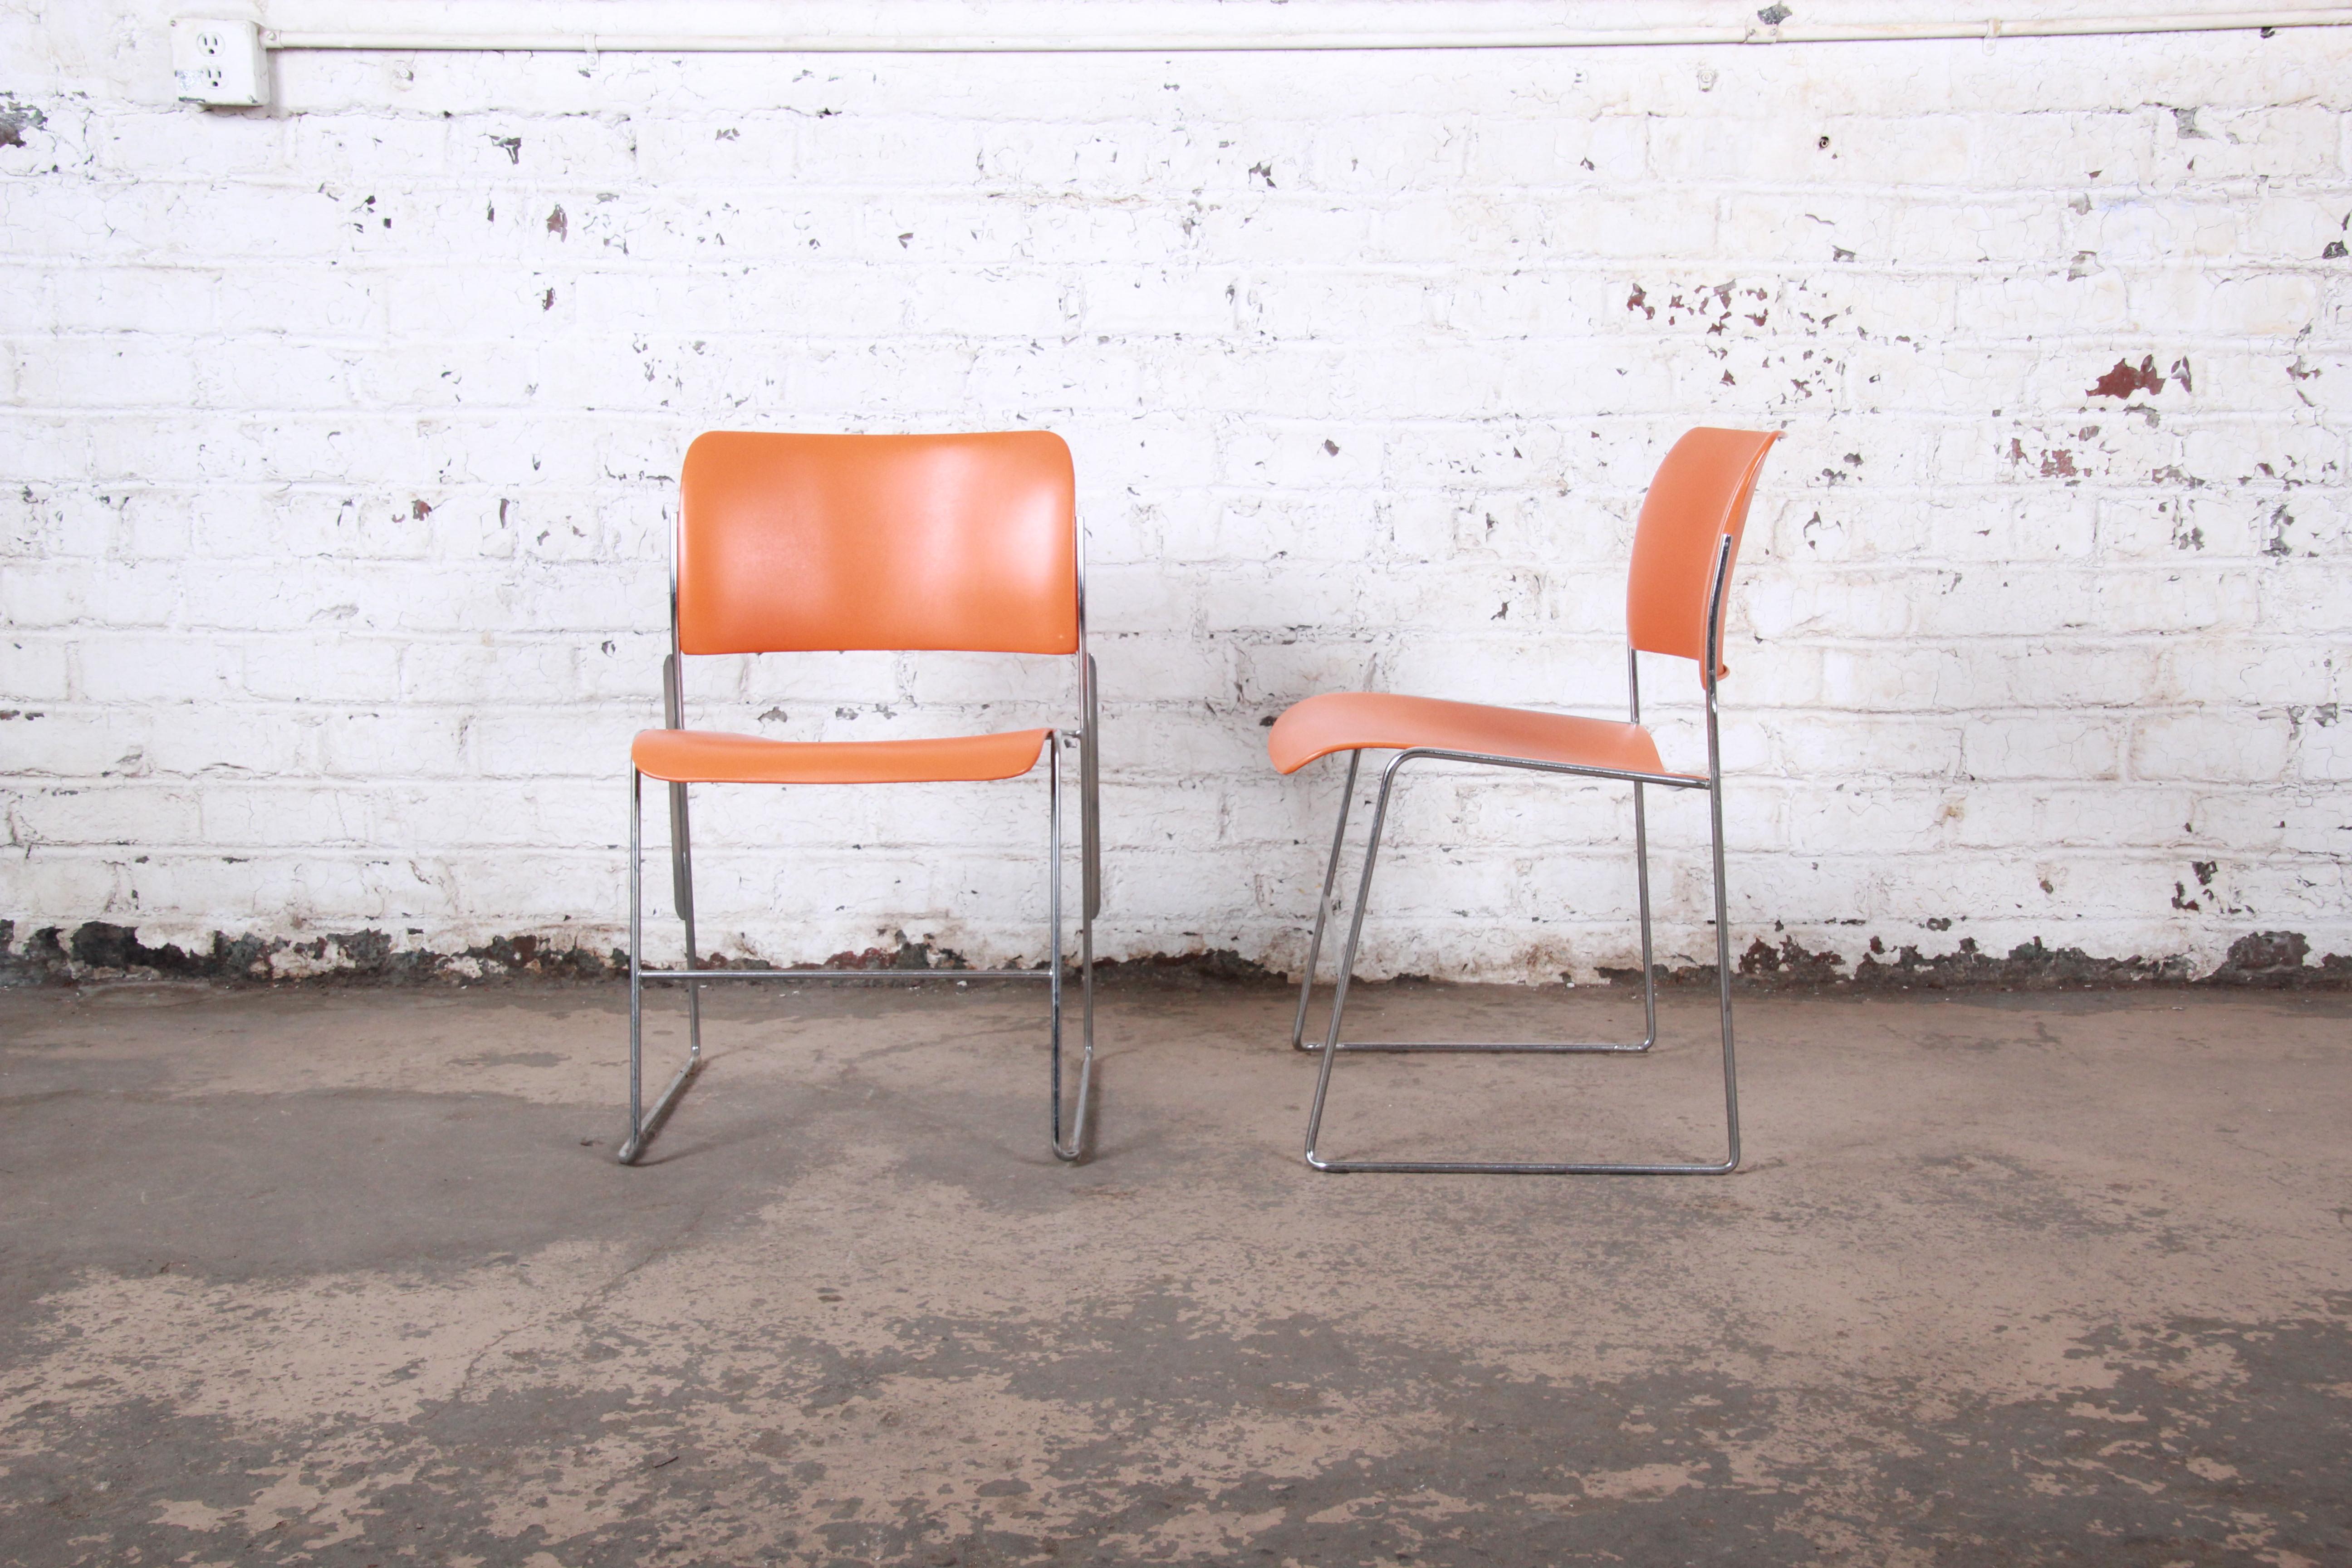 Industrial David Rowland 40/4 Orange and Chrome Stacking Chairs, Pair